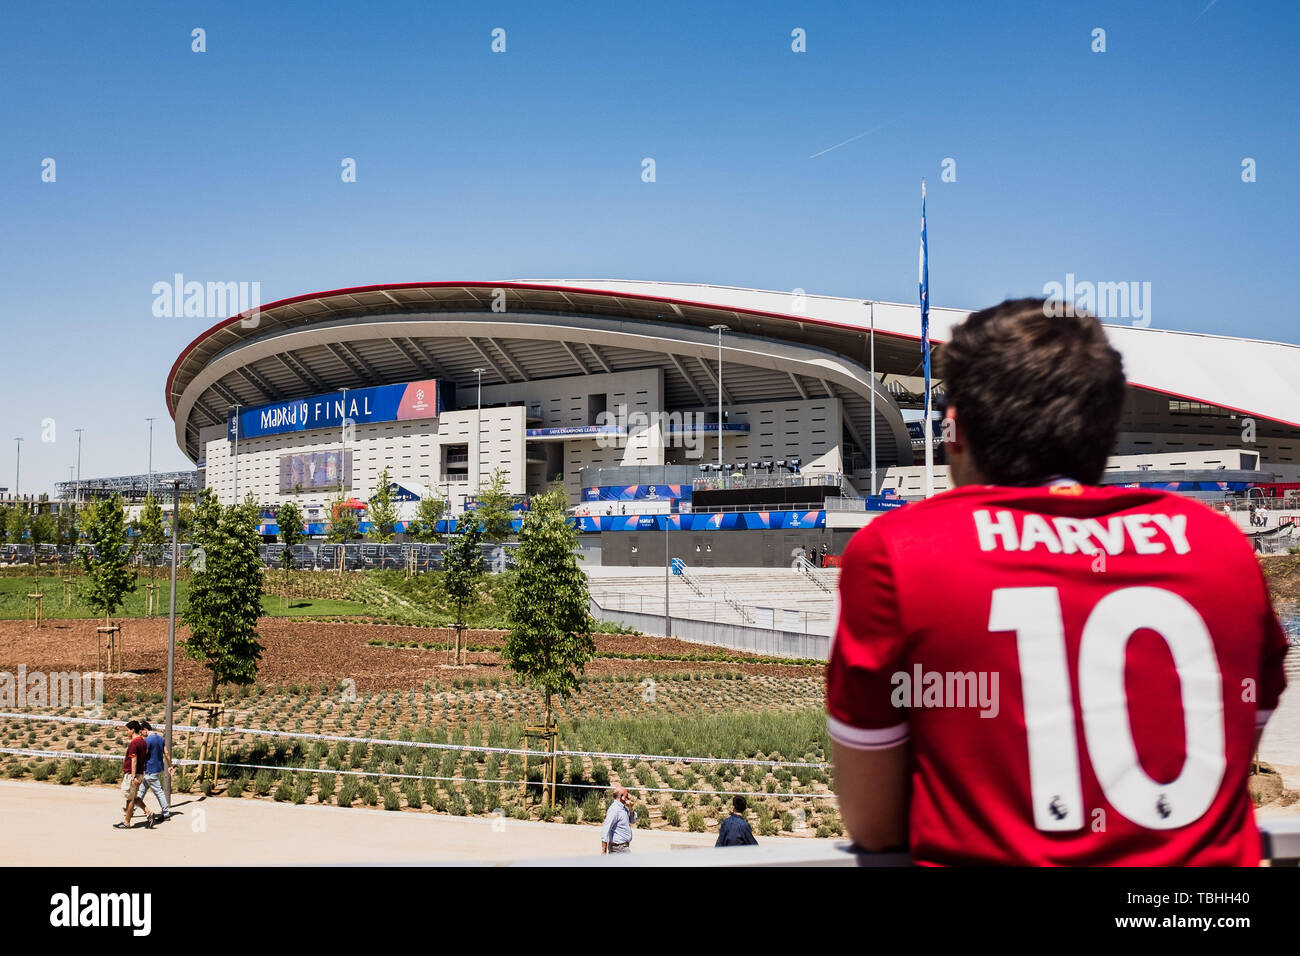 Supporter seen waiting for the final in front of the Wanda Metropolitano Stadium. Madrid hosts the UEFA Champions League Final between Liverpool and Tottenham Hotspur at the Wanda Metropolitano Stadium. Stock Photo